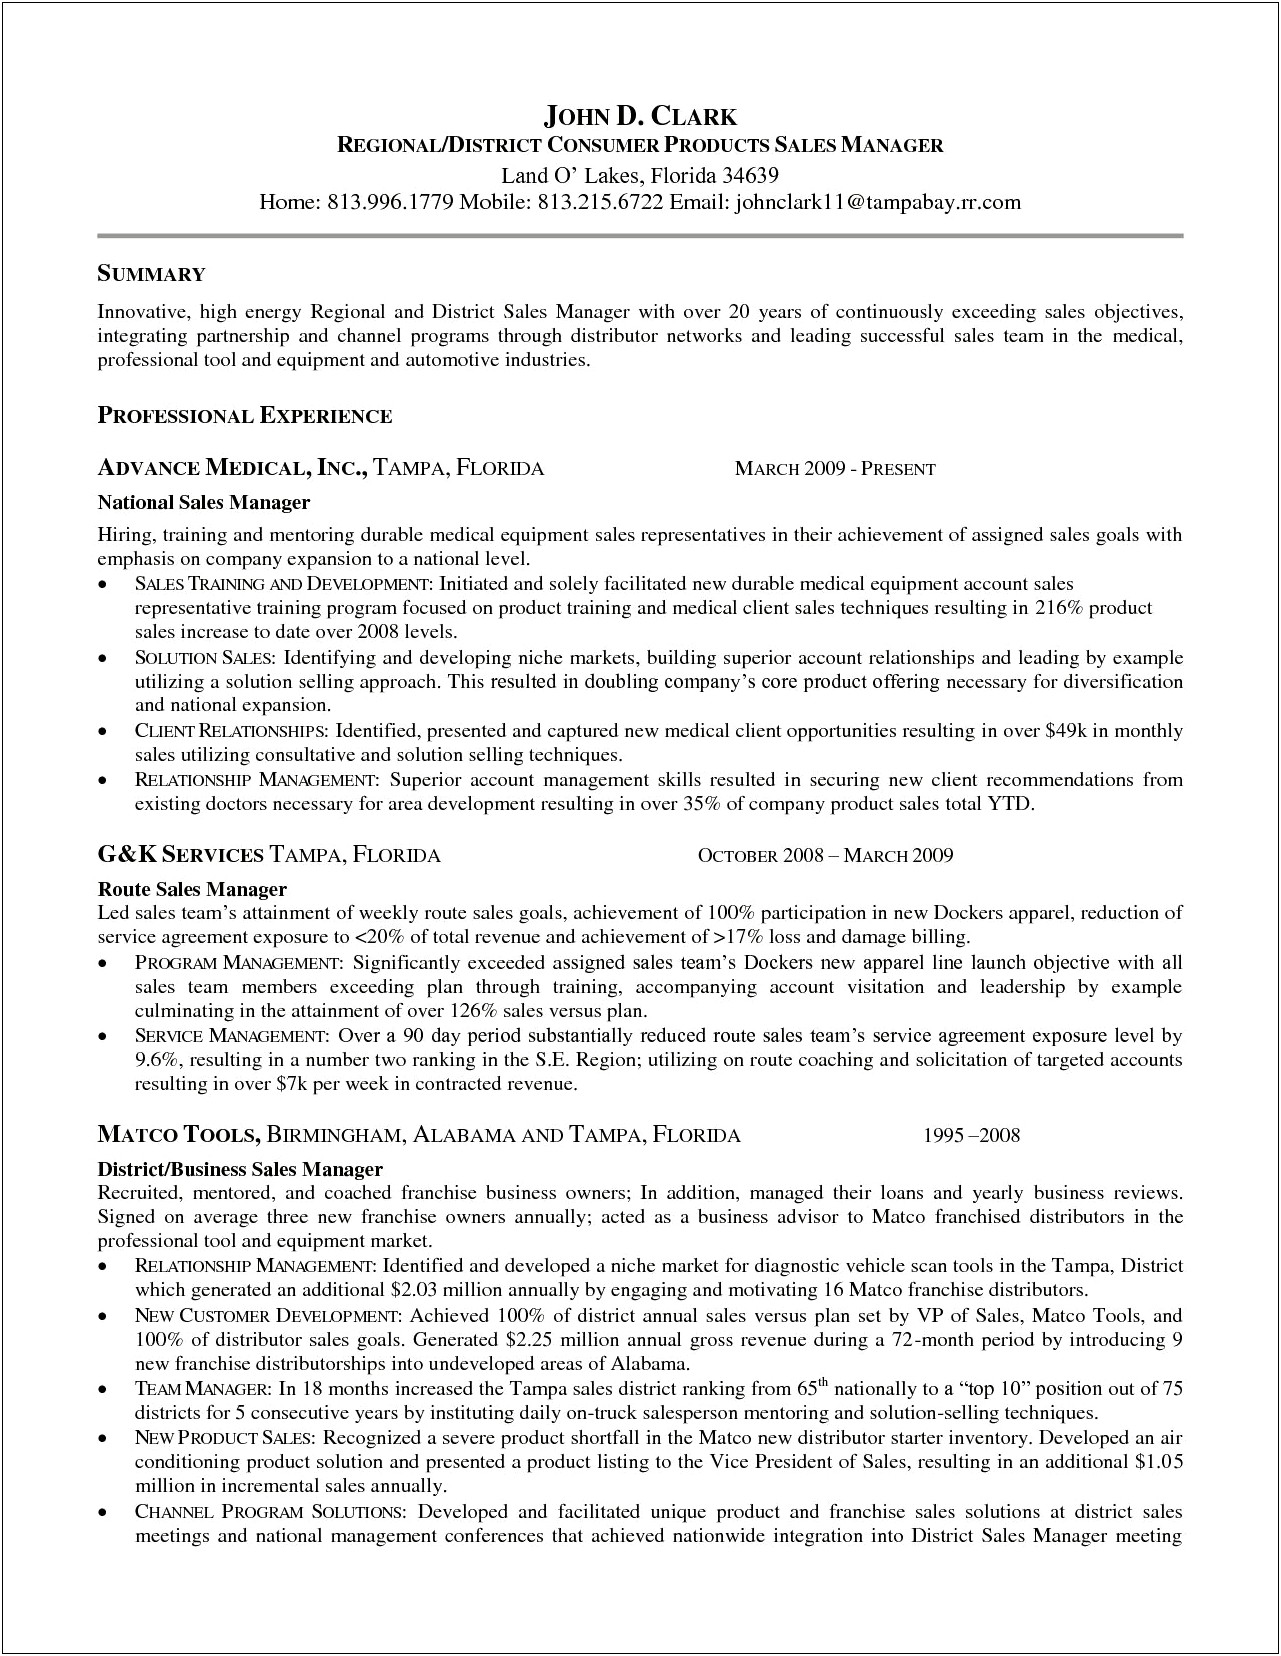 Resume Objective Samples Experienced Manager